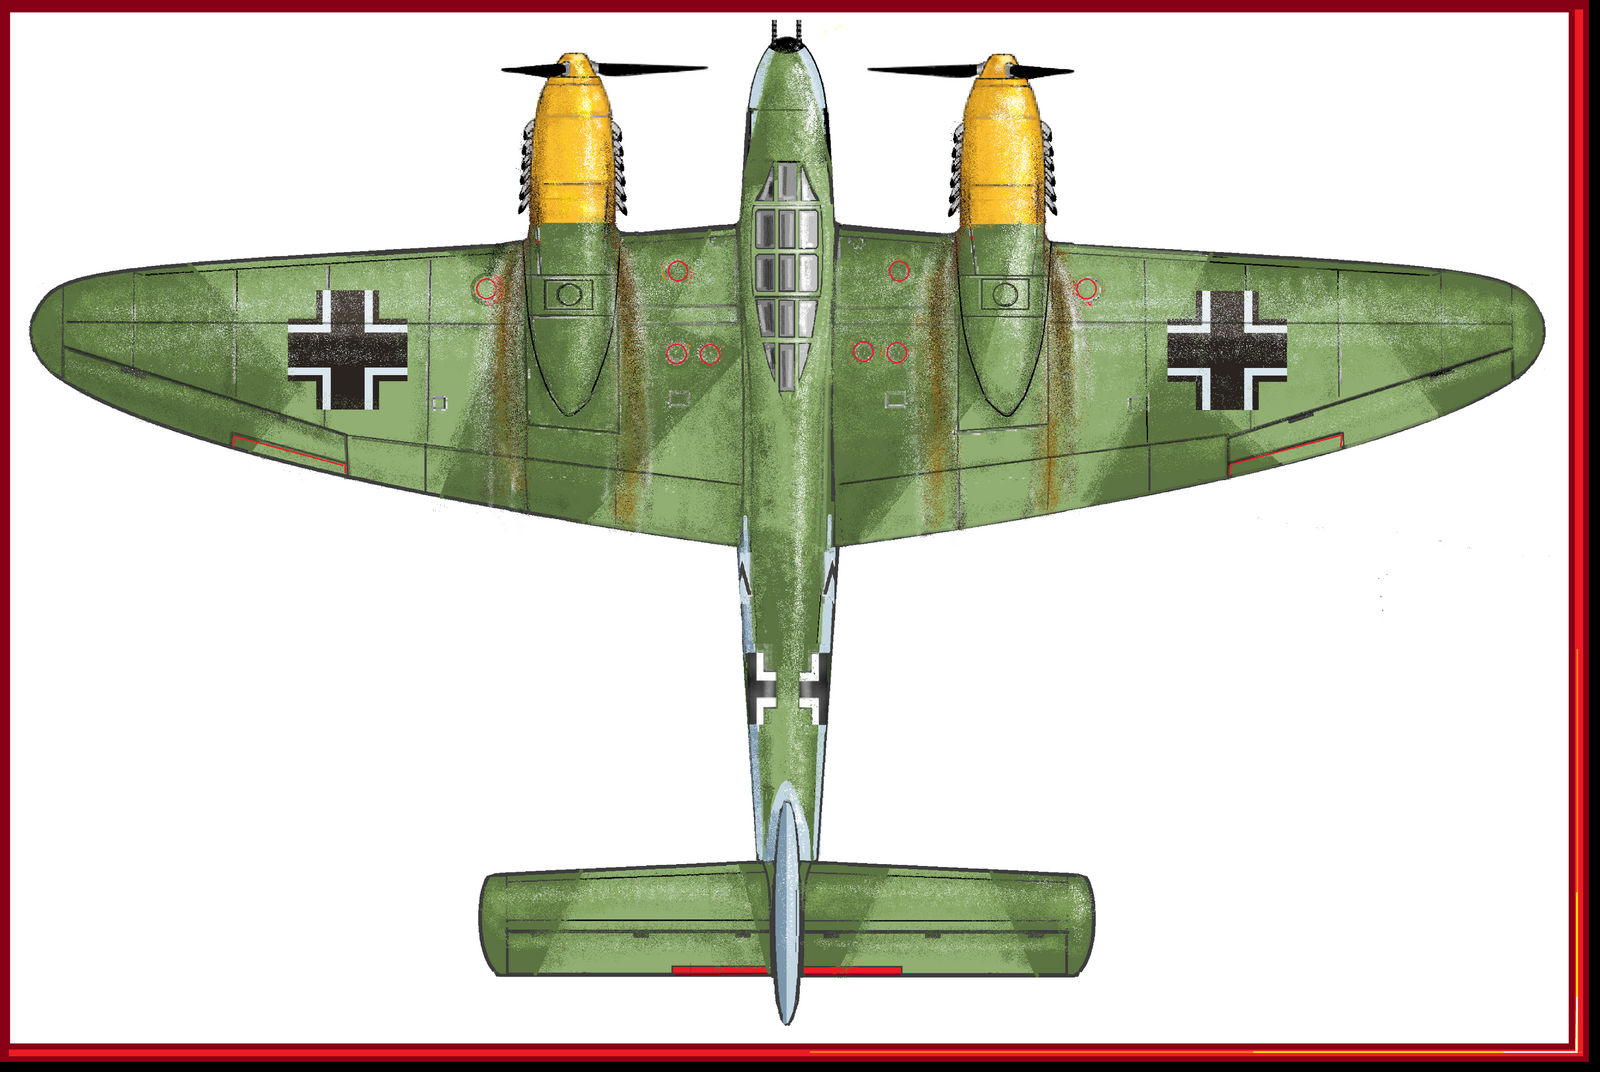 bf_ve_1110a_wolf_fighter_top_view_by_jim